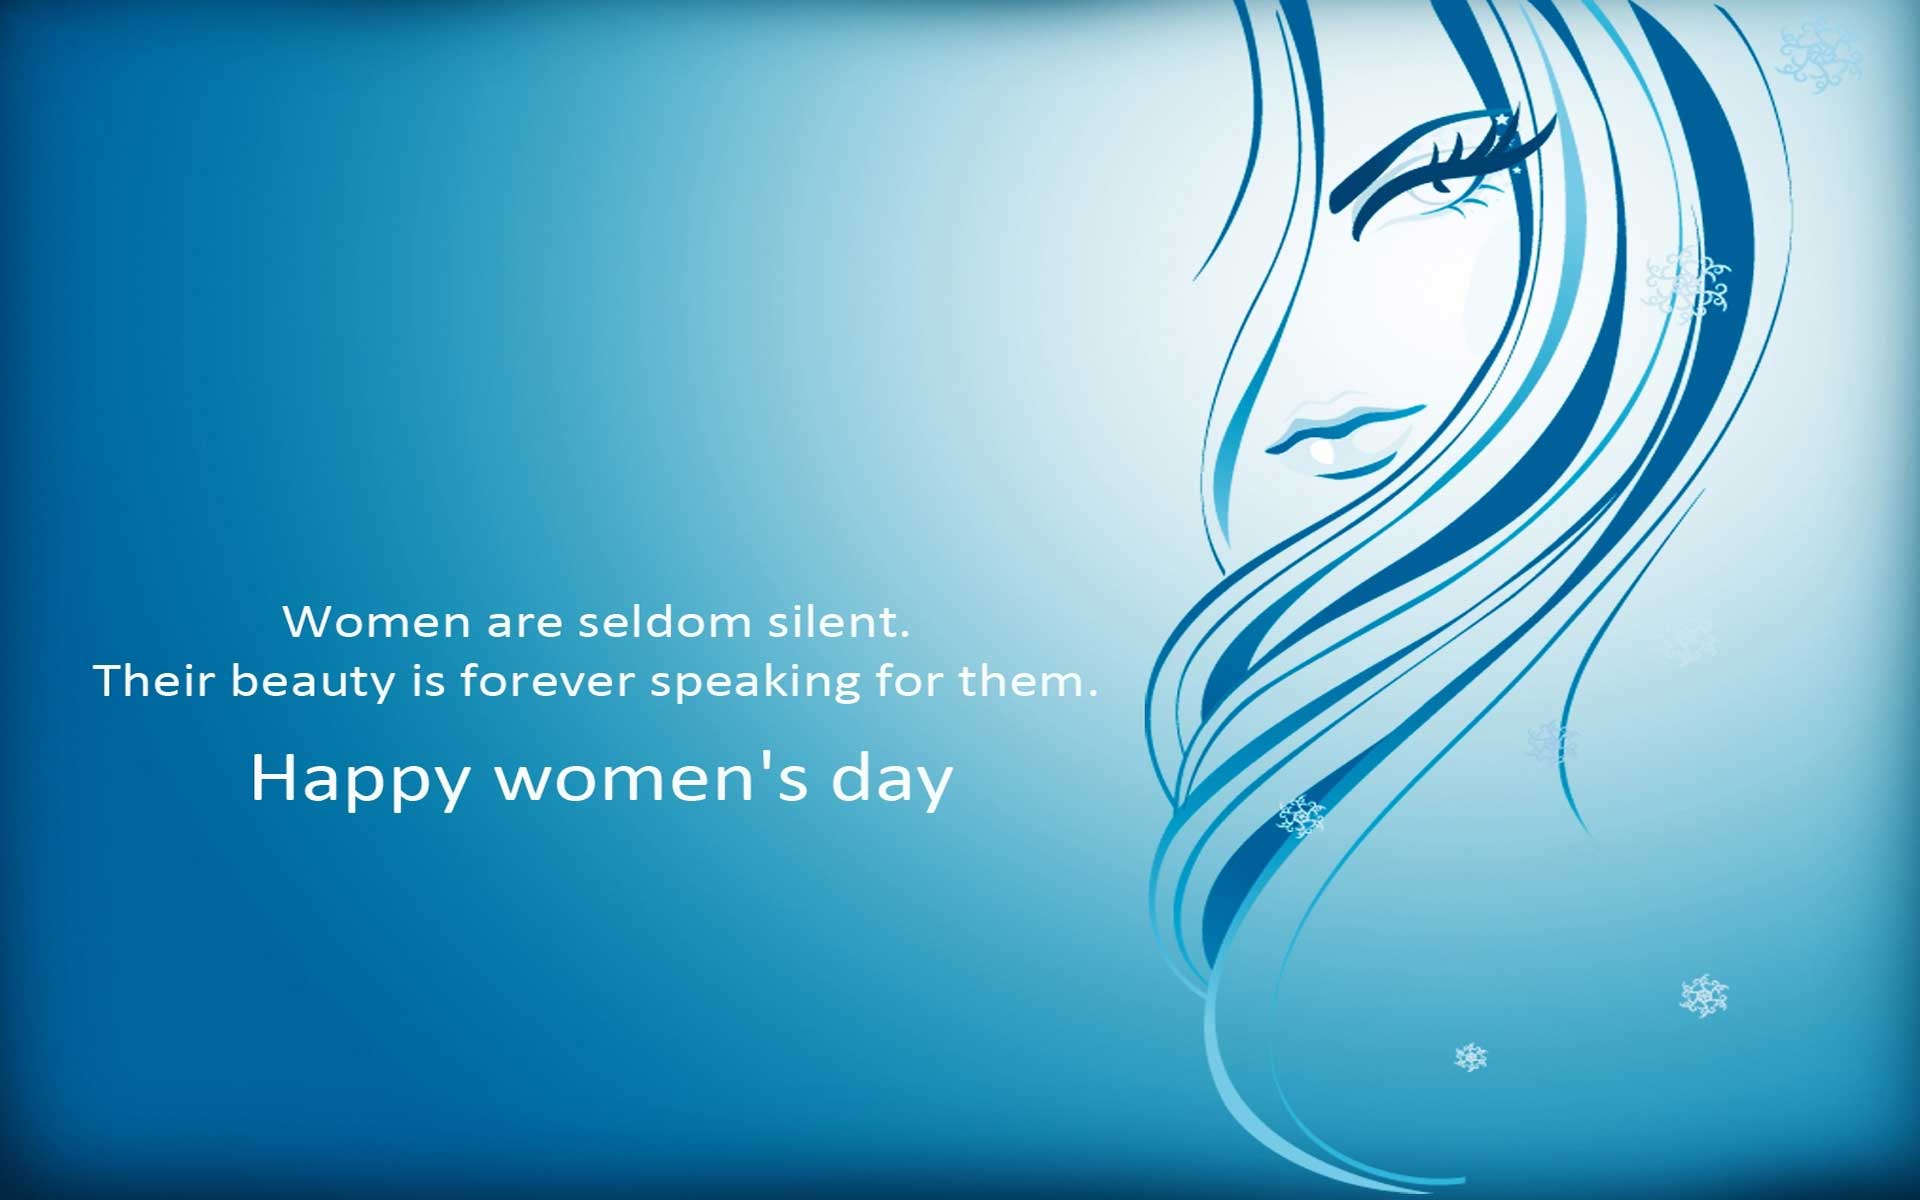 Happy Women's Day Image for Women's Day 2019